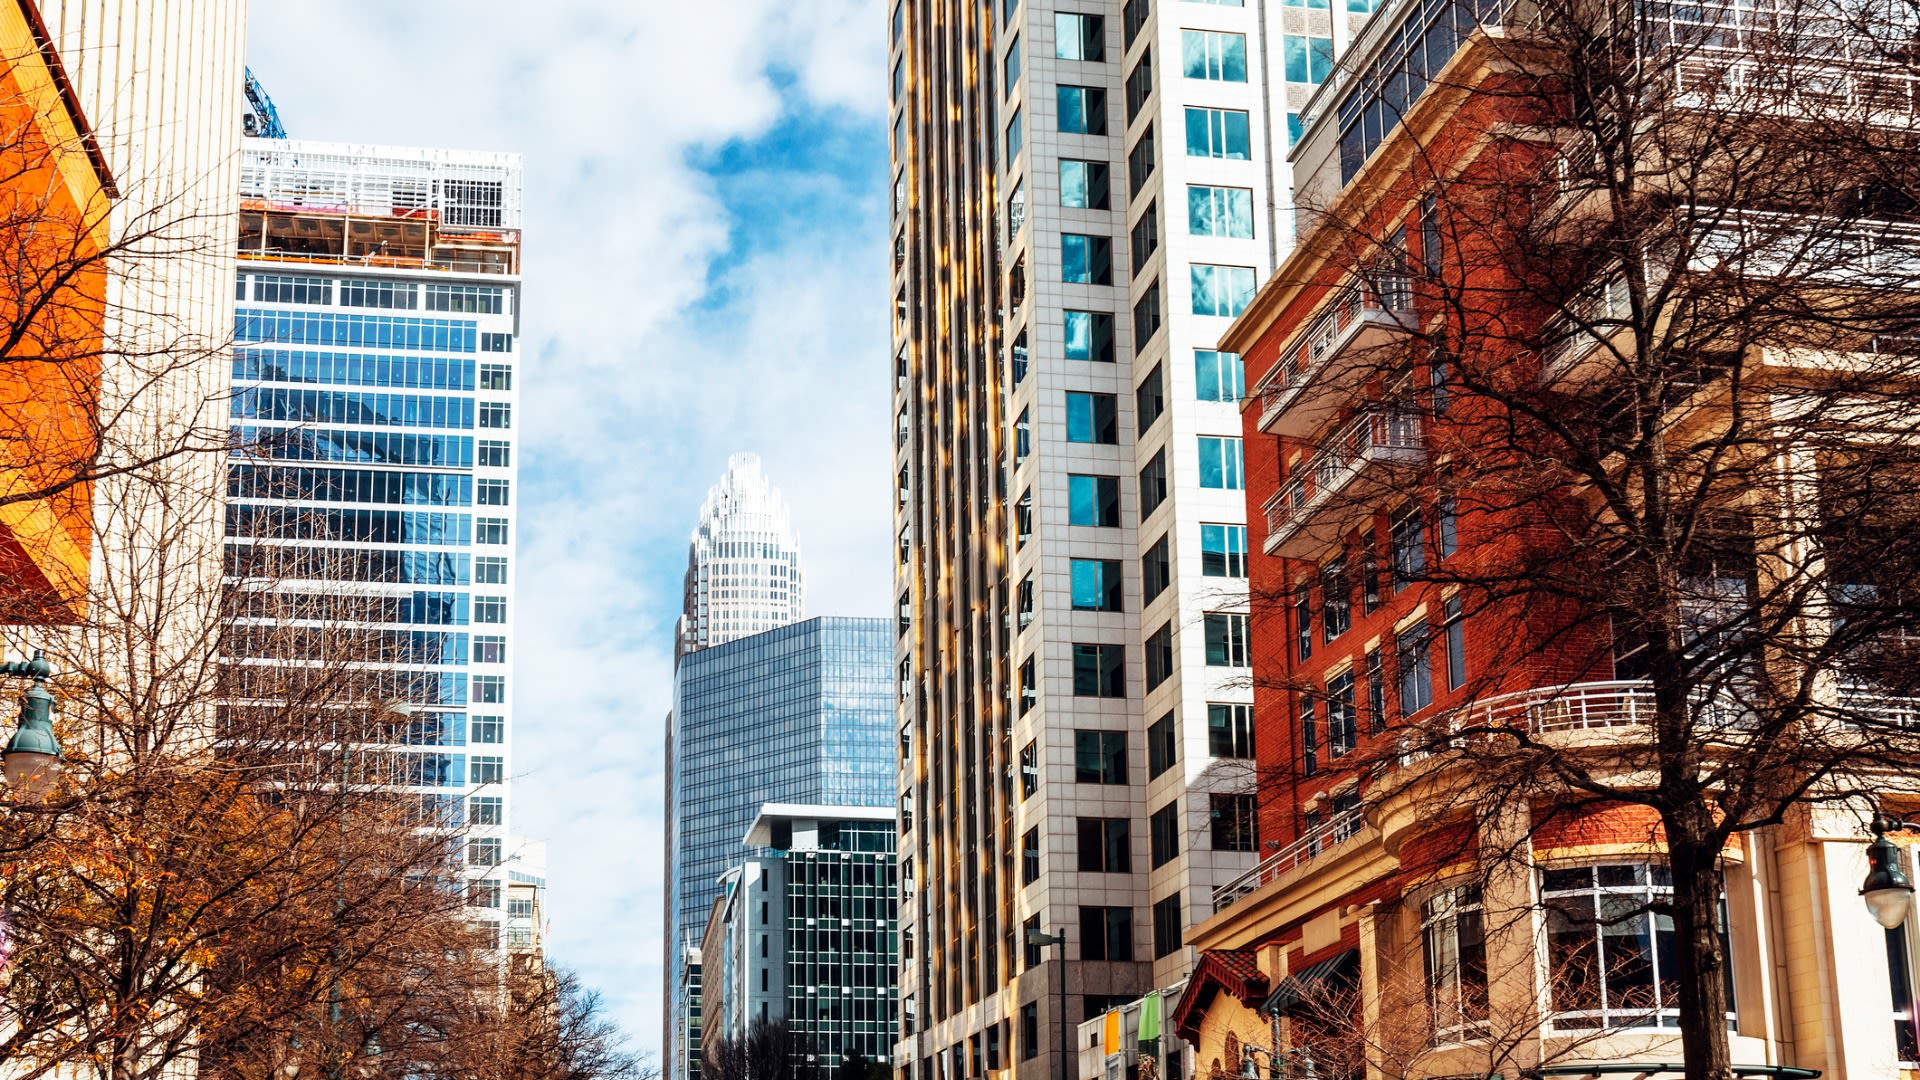 7 Reasons Why Retirement in Charlotte, North Carolina, Can Cost Less Than $50,000 a Year